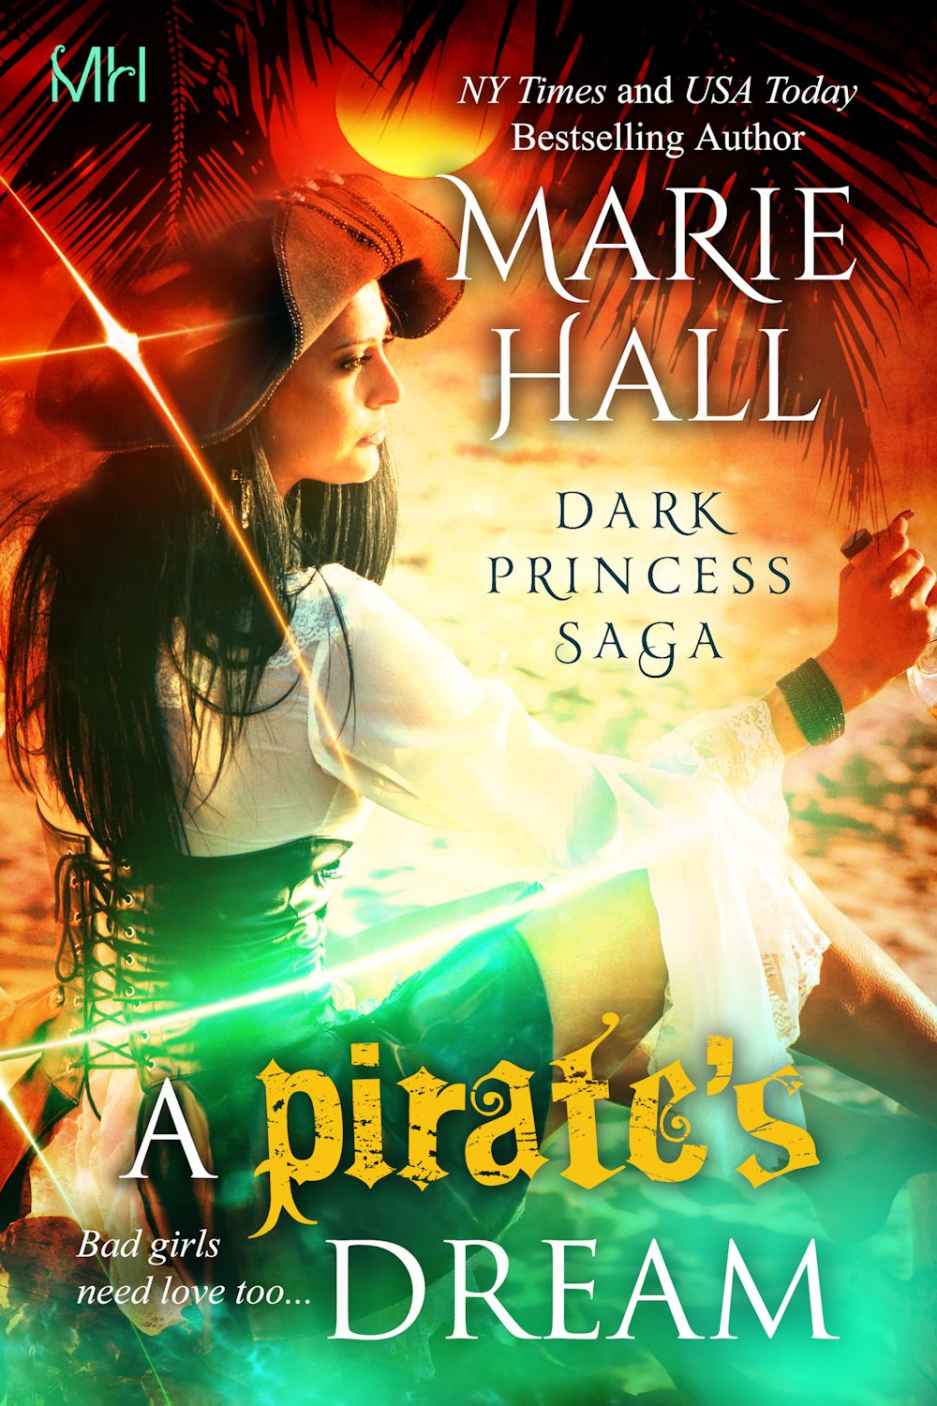 A Pirate's Dream by Marie Hall